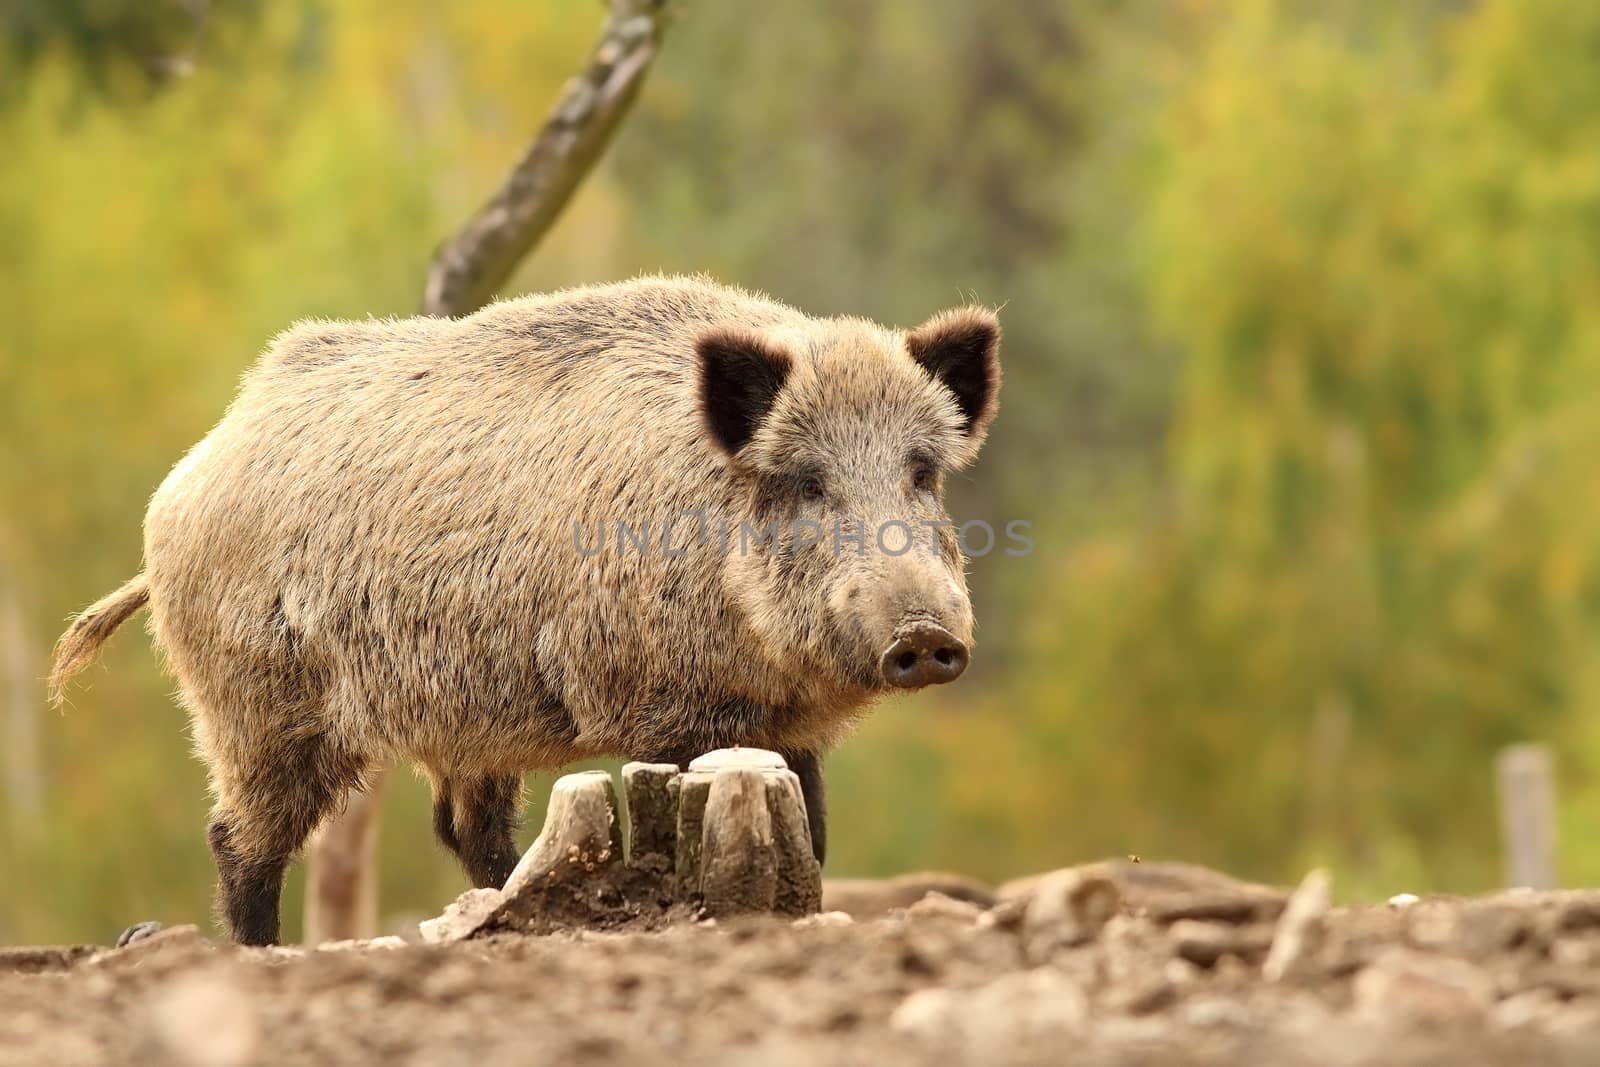 wild hog near stump ( Sus scrofa ) over green out of focus background